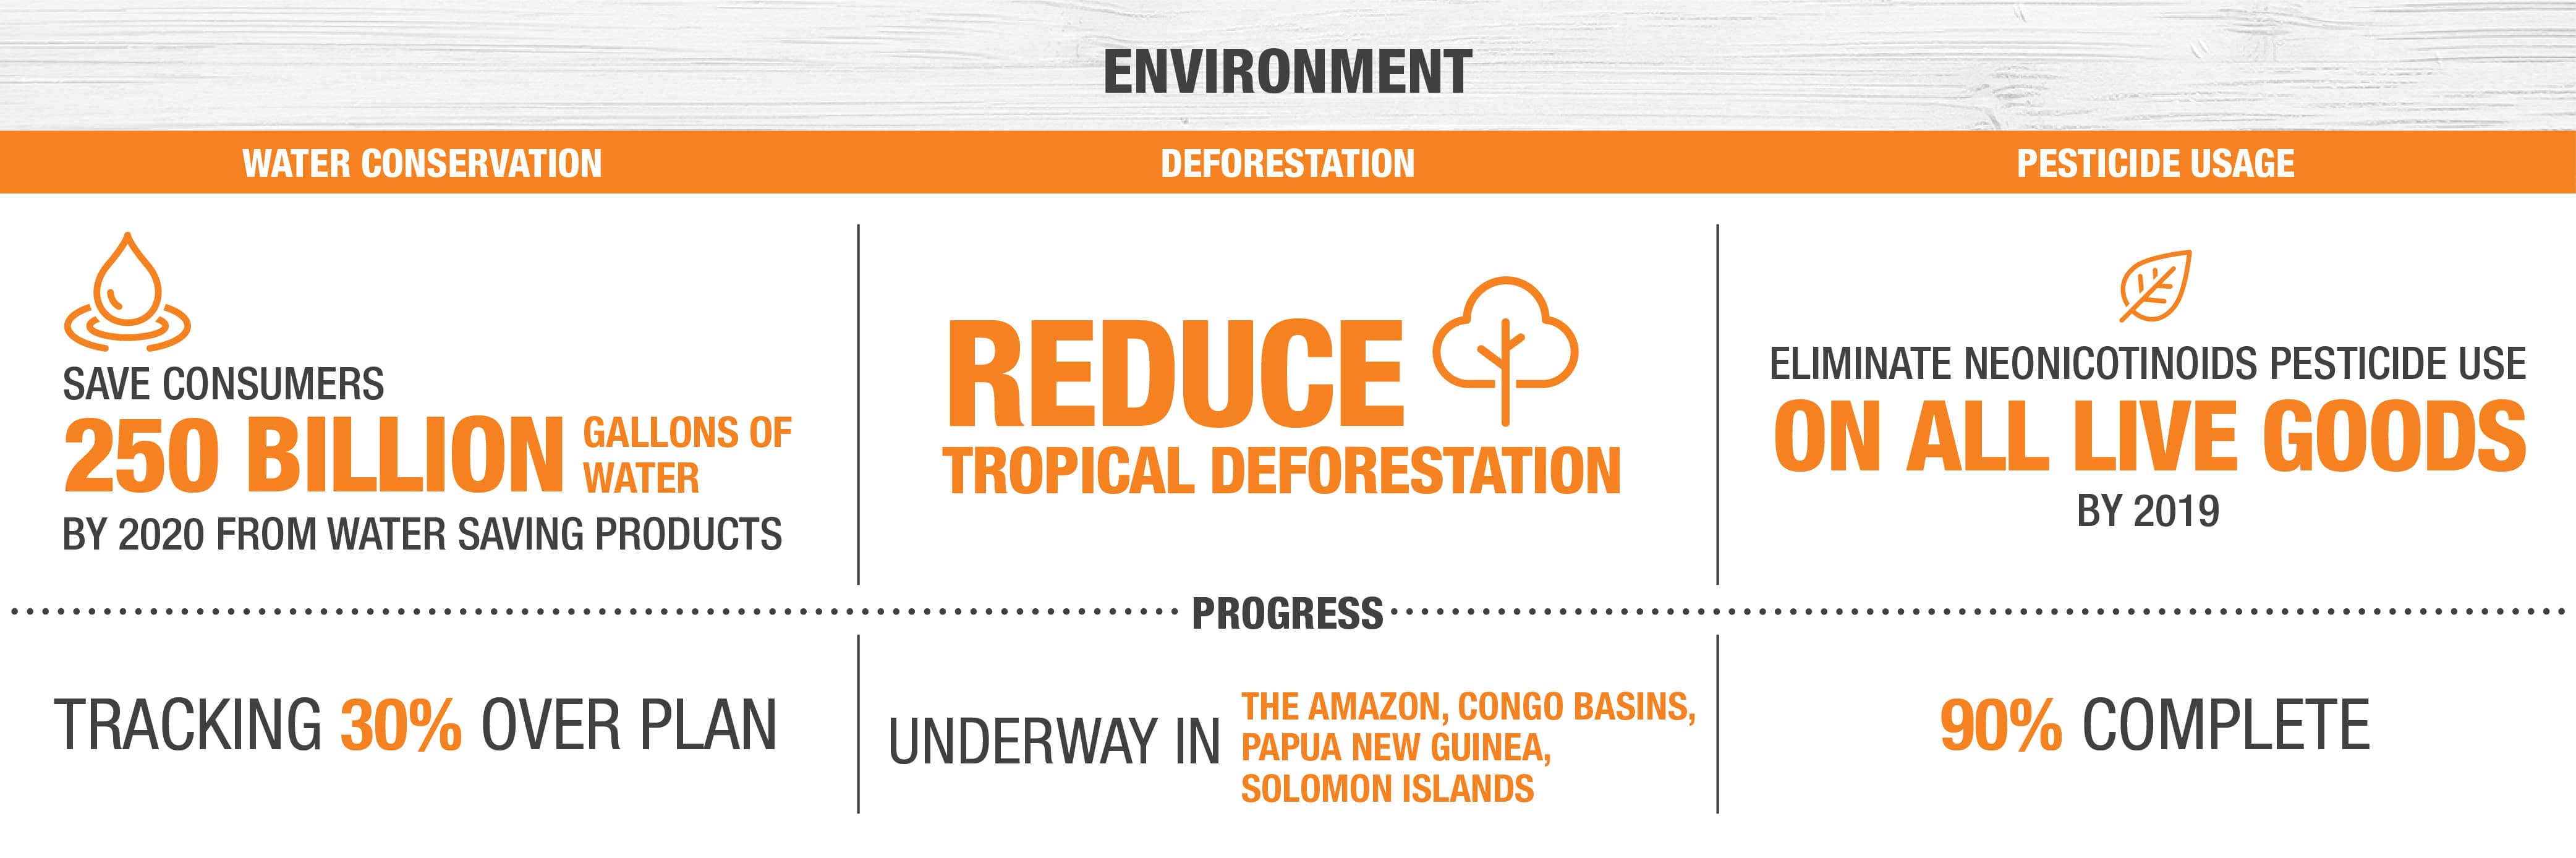 Save consumers 250 billion gallons of water by 2020 from water saving products. Reduce Tropical Deforestation. Eliminate neonicotinoids pesticide use on all live goods by 2019.